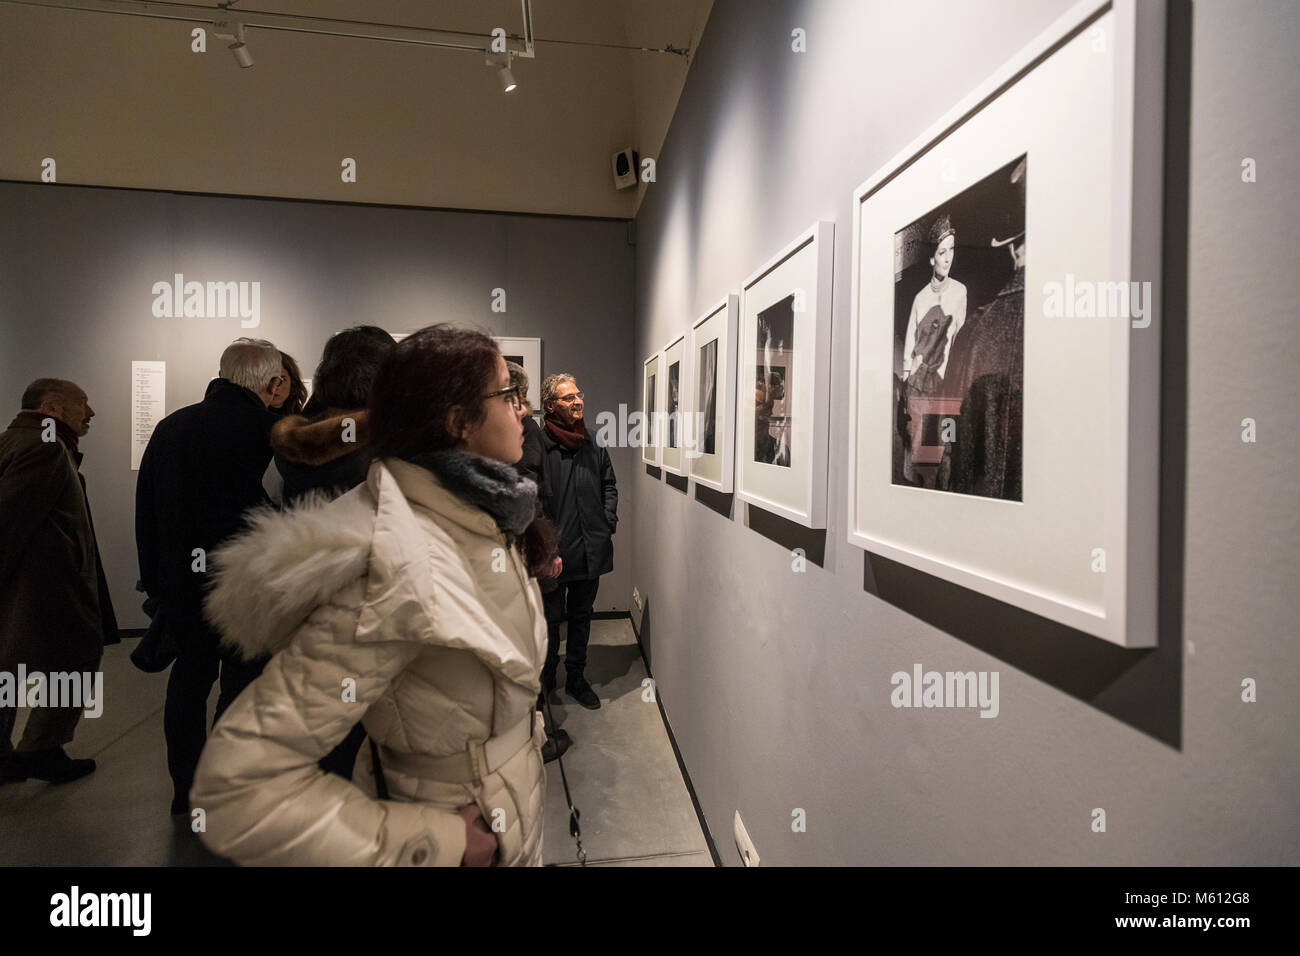 Italy Turin Palazzo Chiablese 27th February 2018 - inauguration of the exhibition with 250 images created by Frank Horvat, along with thirty other images taken from his private collection. The exhibition from 28 February to 20 May in the Chiablese Halls - illustrates the journey taken by the great photographer through the evolution of photographic language and its techniques. Stock Photo